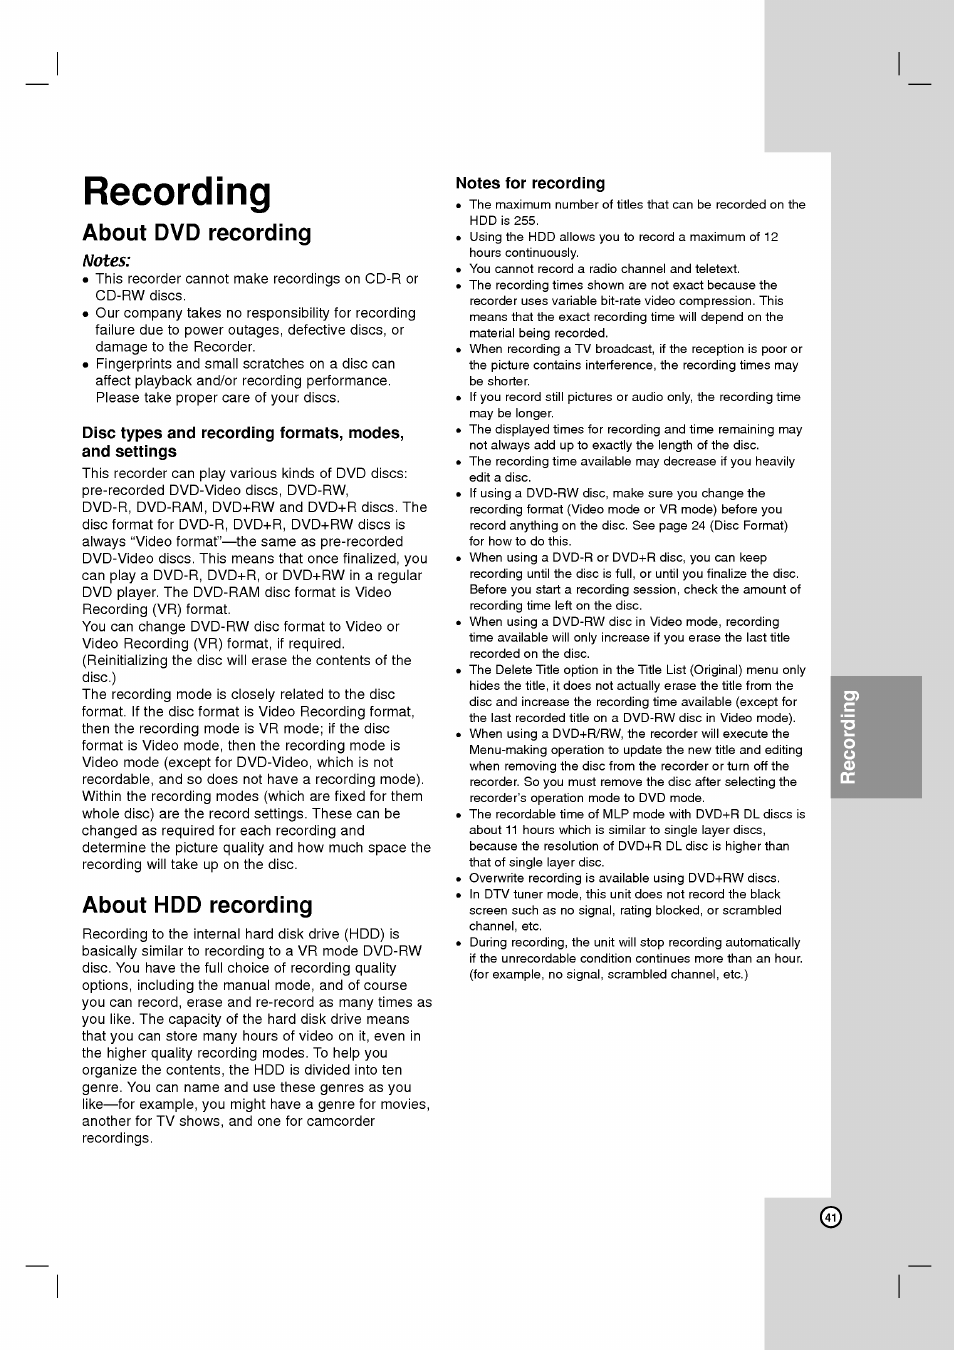 Recording, About dvd recording, Notes | About hdd recording, Recording -48, About dvd recording about hdd recording | LG RH2T160 User Manual | Page 41 / 41